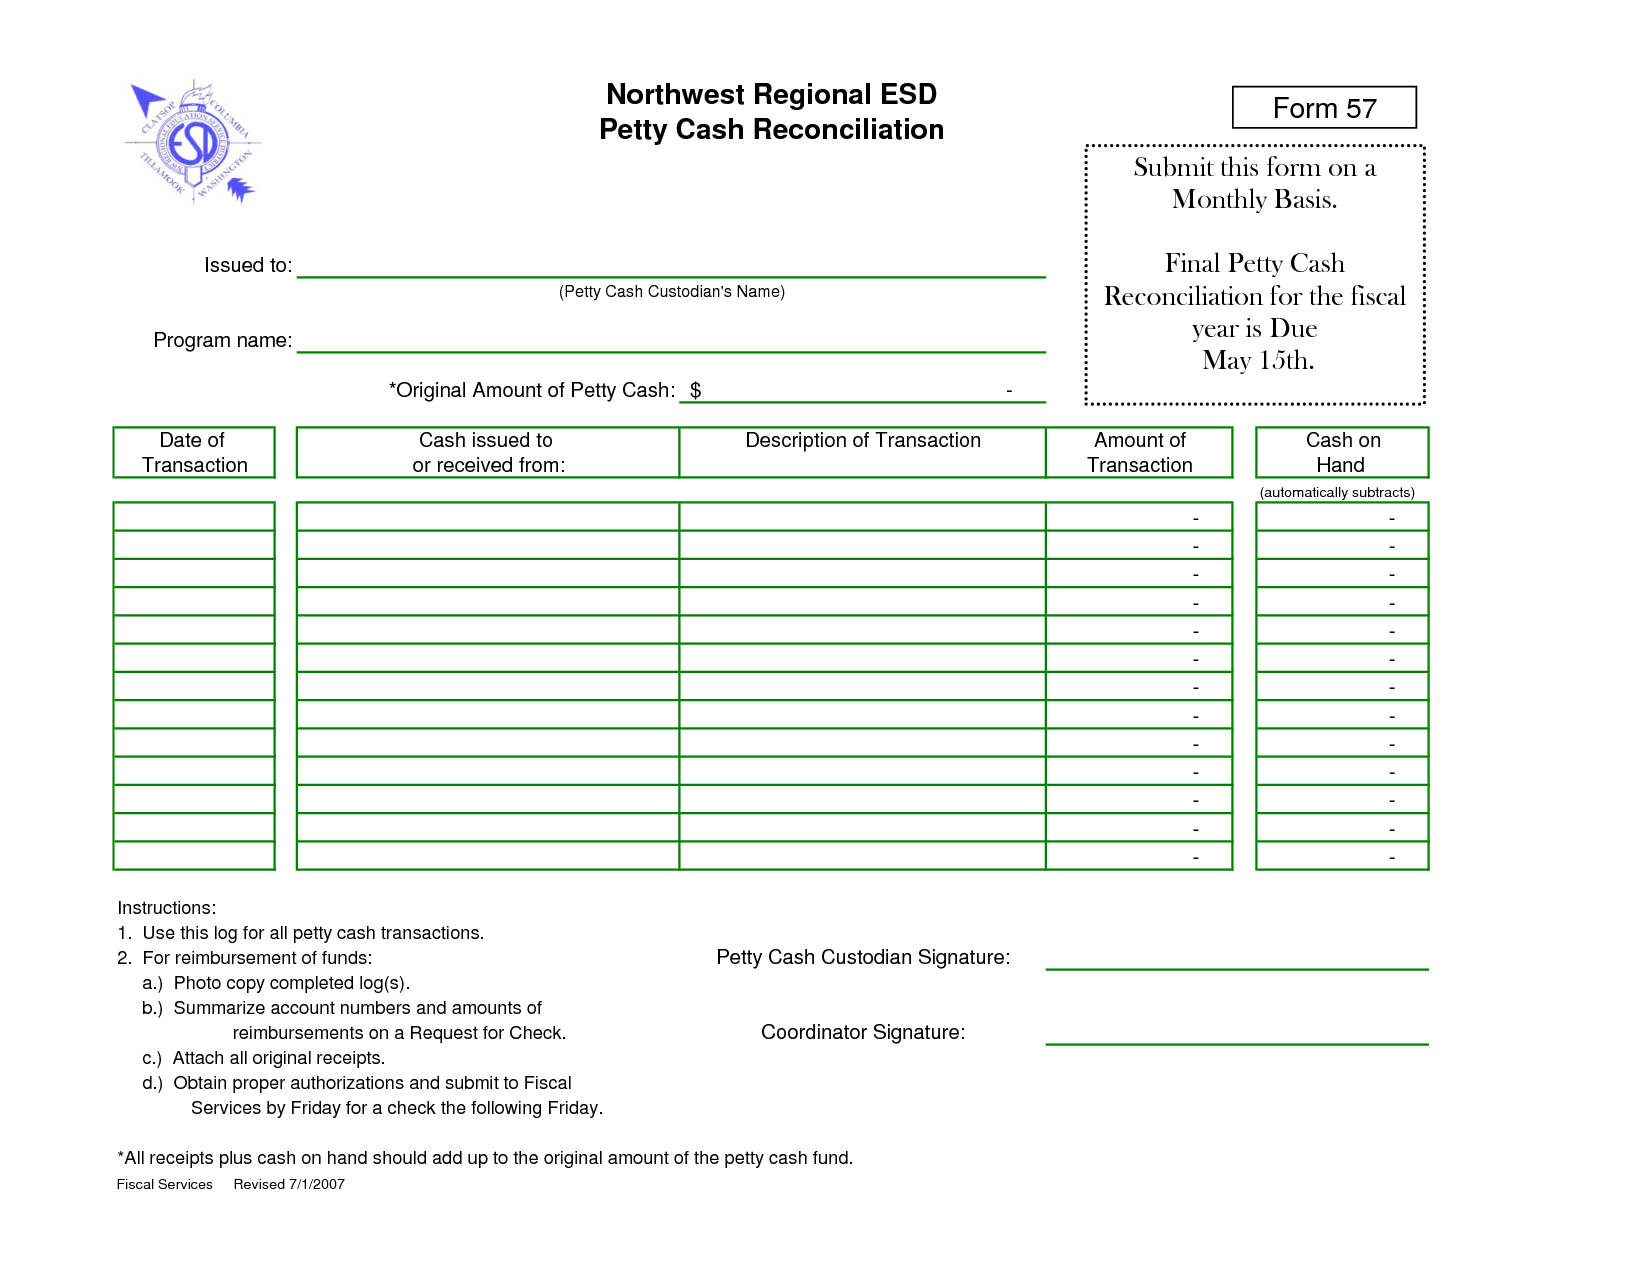 Petty Cash Reconciliation Form   Fill Online, Printable, Fillable 